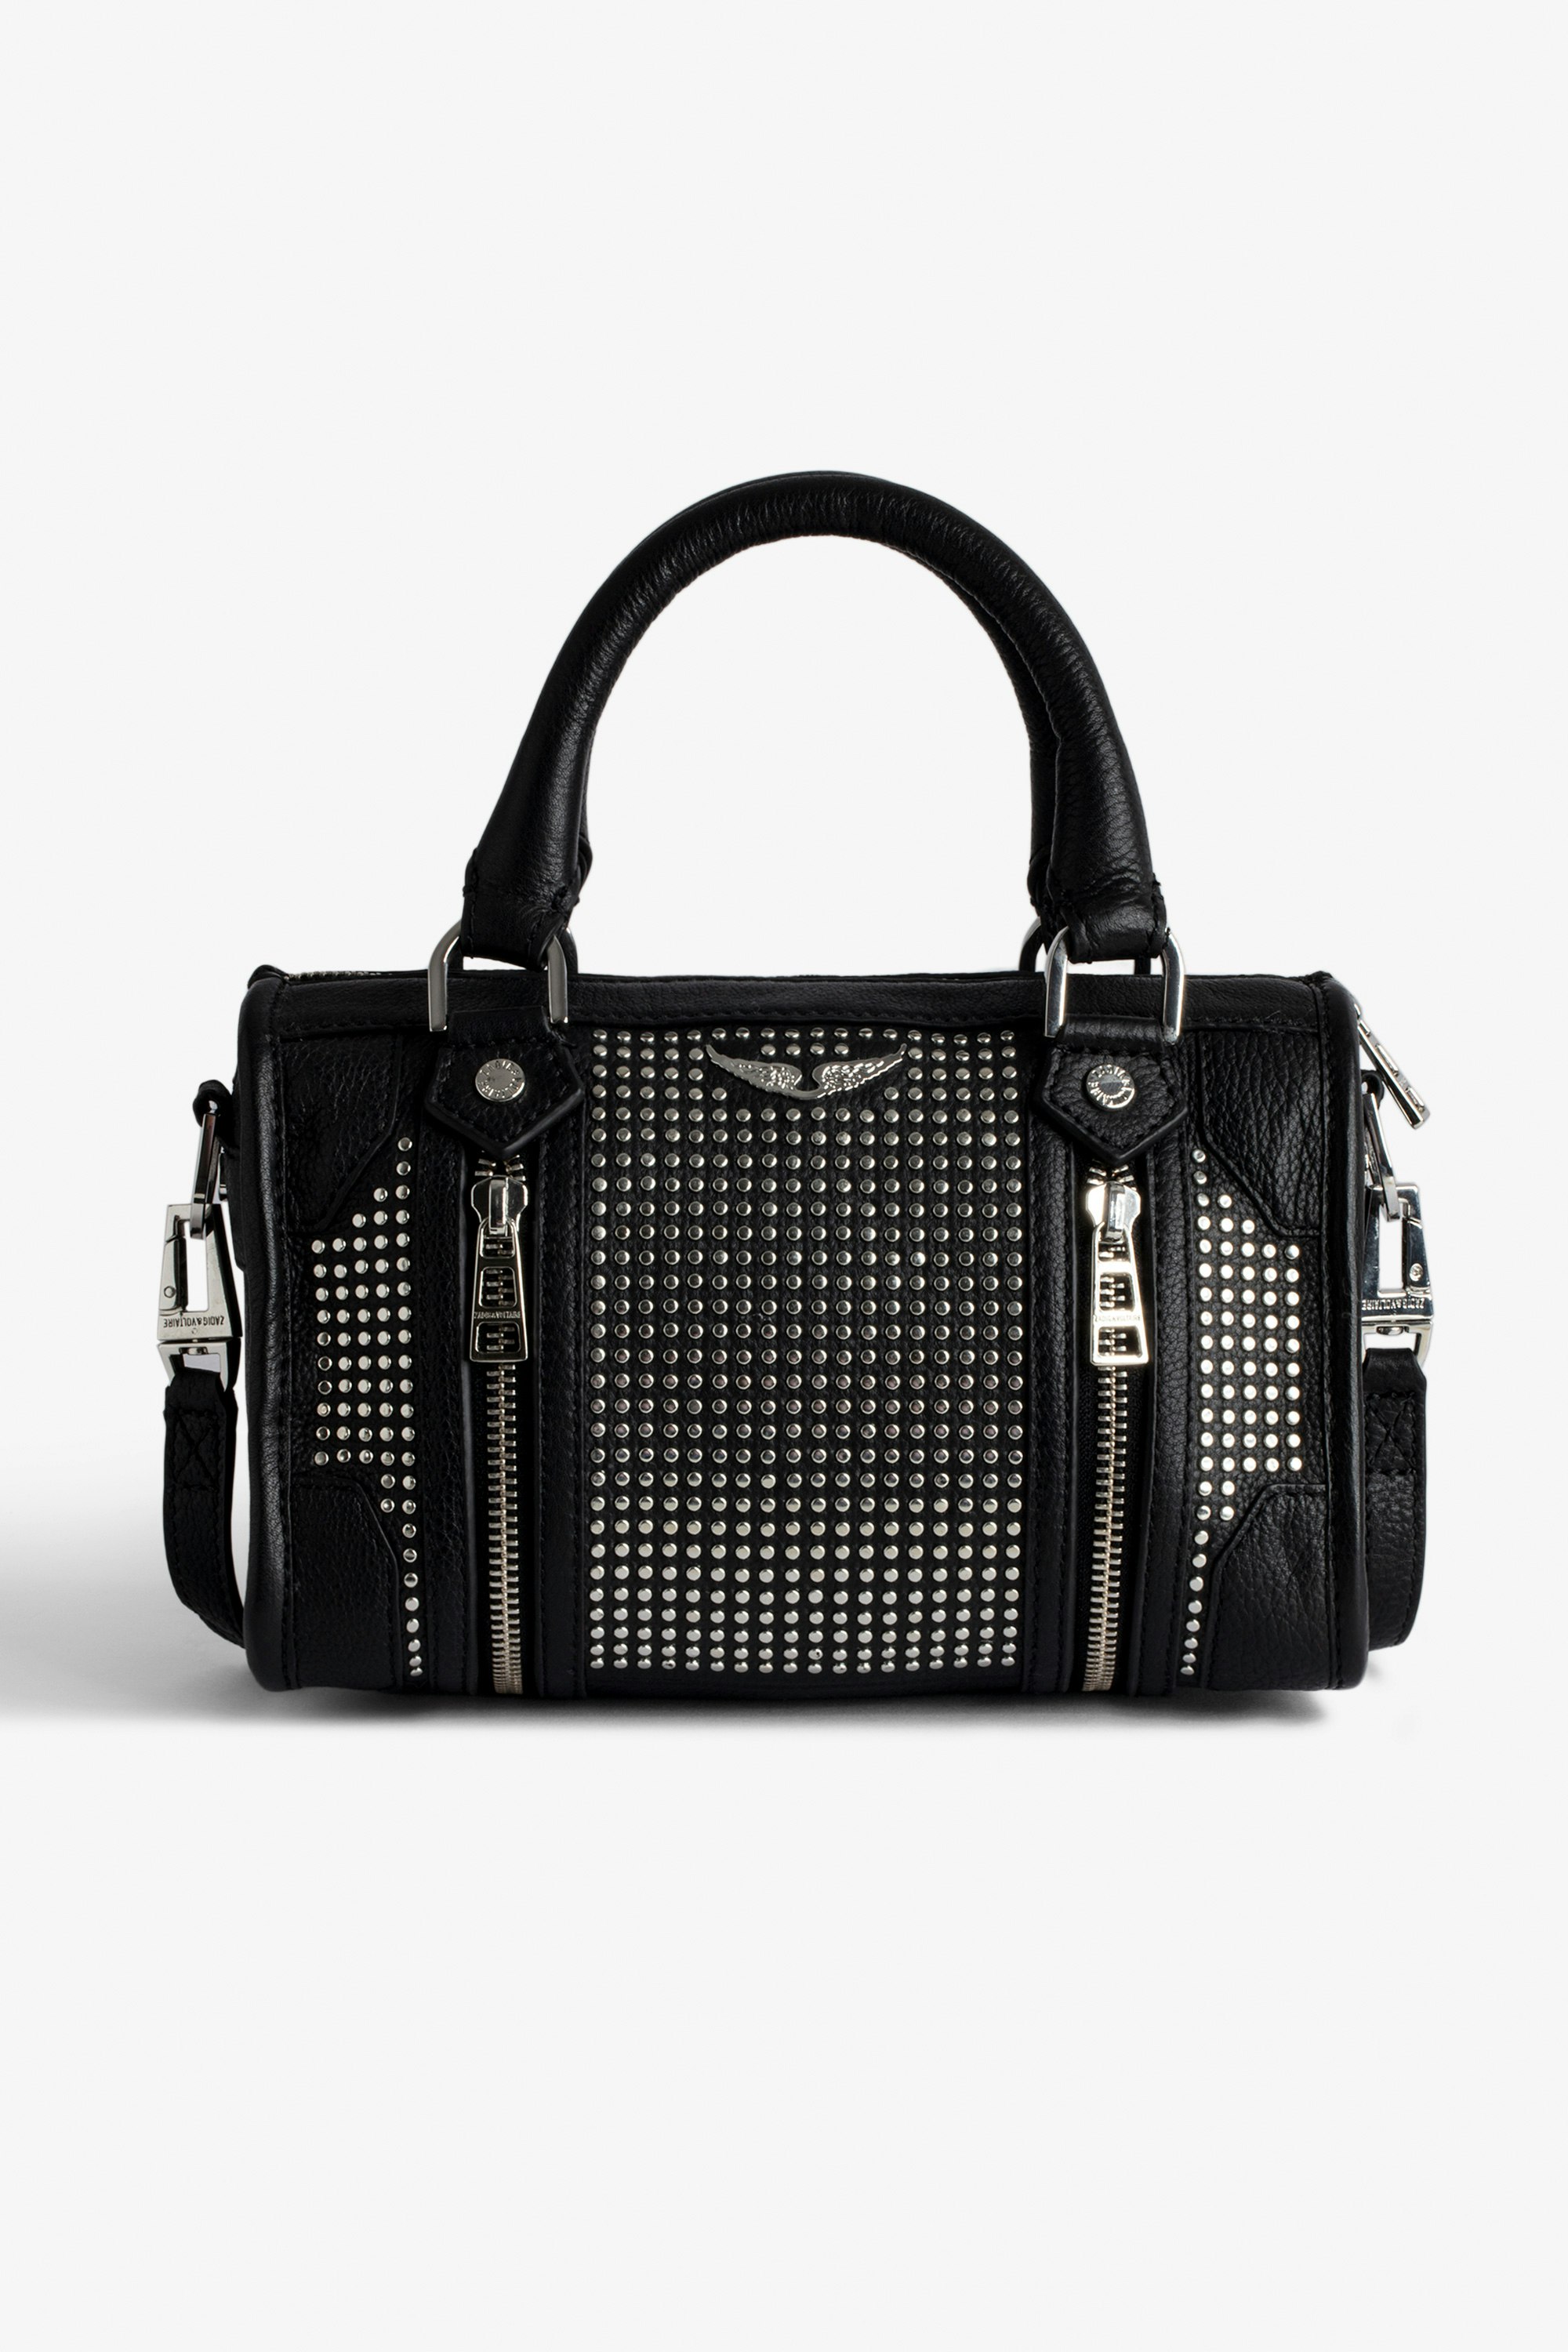 XS Sunny #2 バッグ - Women’s small zipped bag in black leather with studs and a shoulder strap